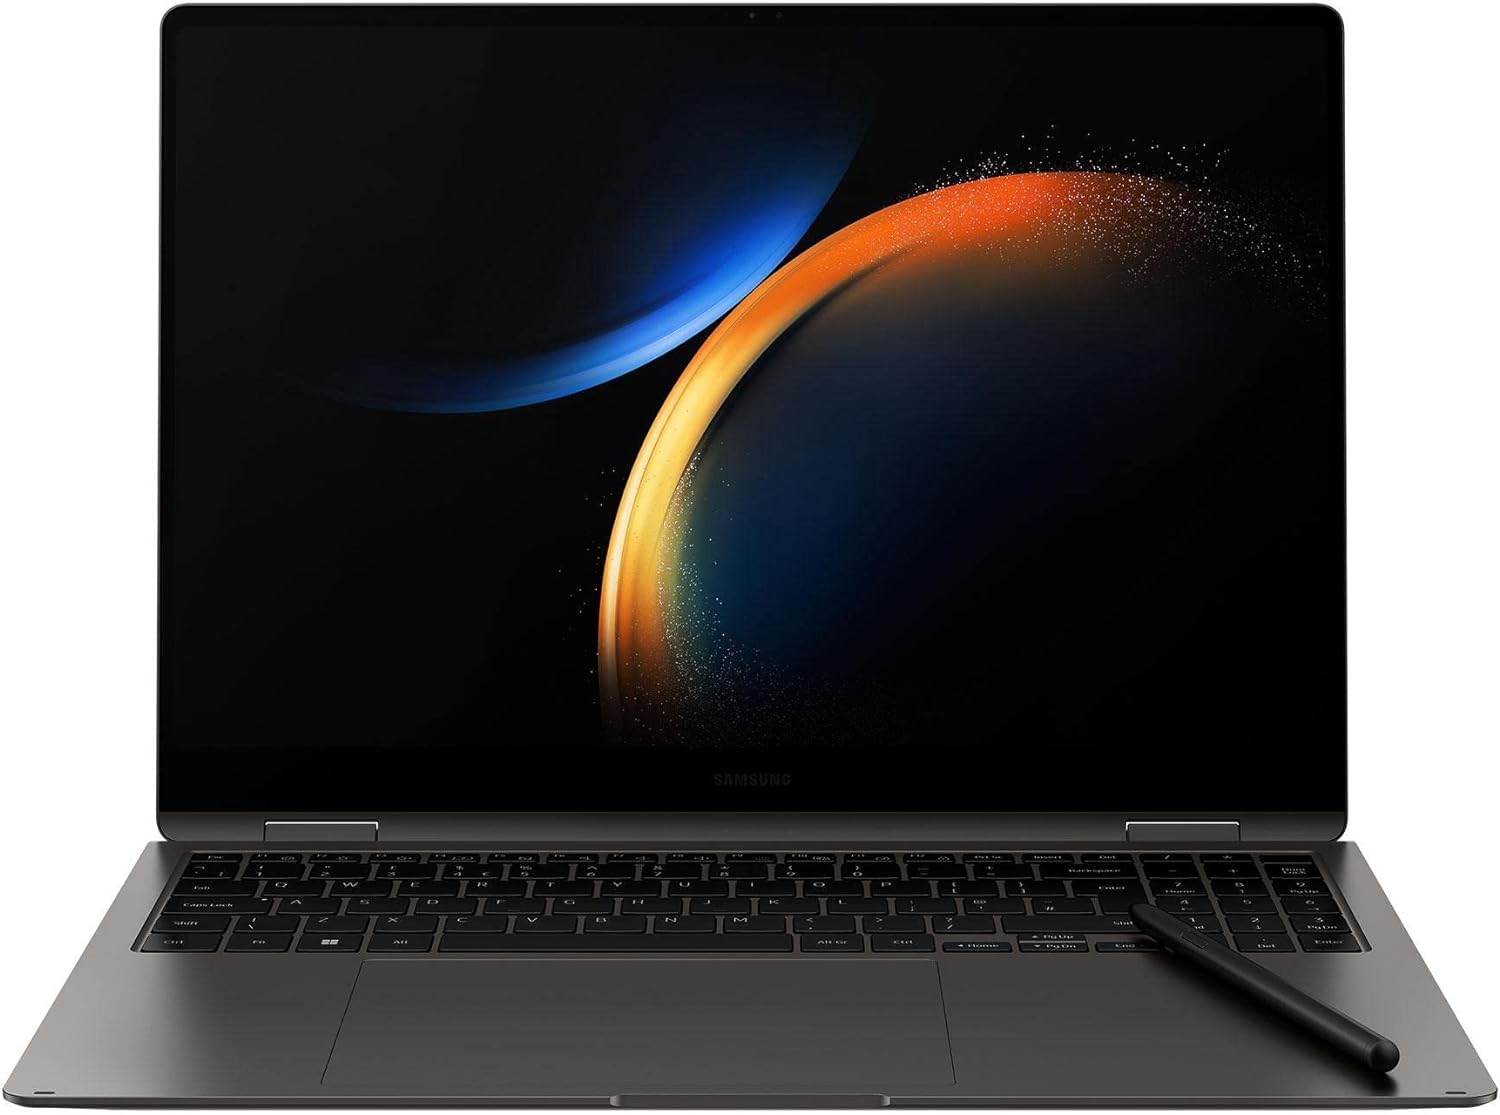 Samsung Galaxy Book3 Pro 360 Wi - Fi Laptop, 16 Inch, 13th gen Intel Core i7 Processor, 16GB RAM, 512GB Storage, Graphite - Official   Import  Single ASIN  Import  Multiple ASIN ×Product customization General Description Gallery Review - Amazing Gadgets Outlet